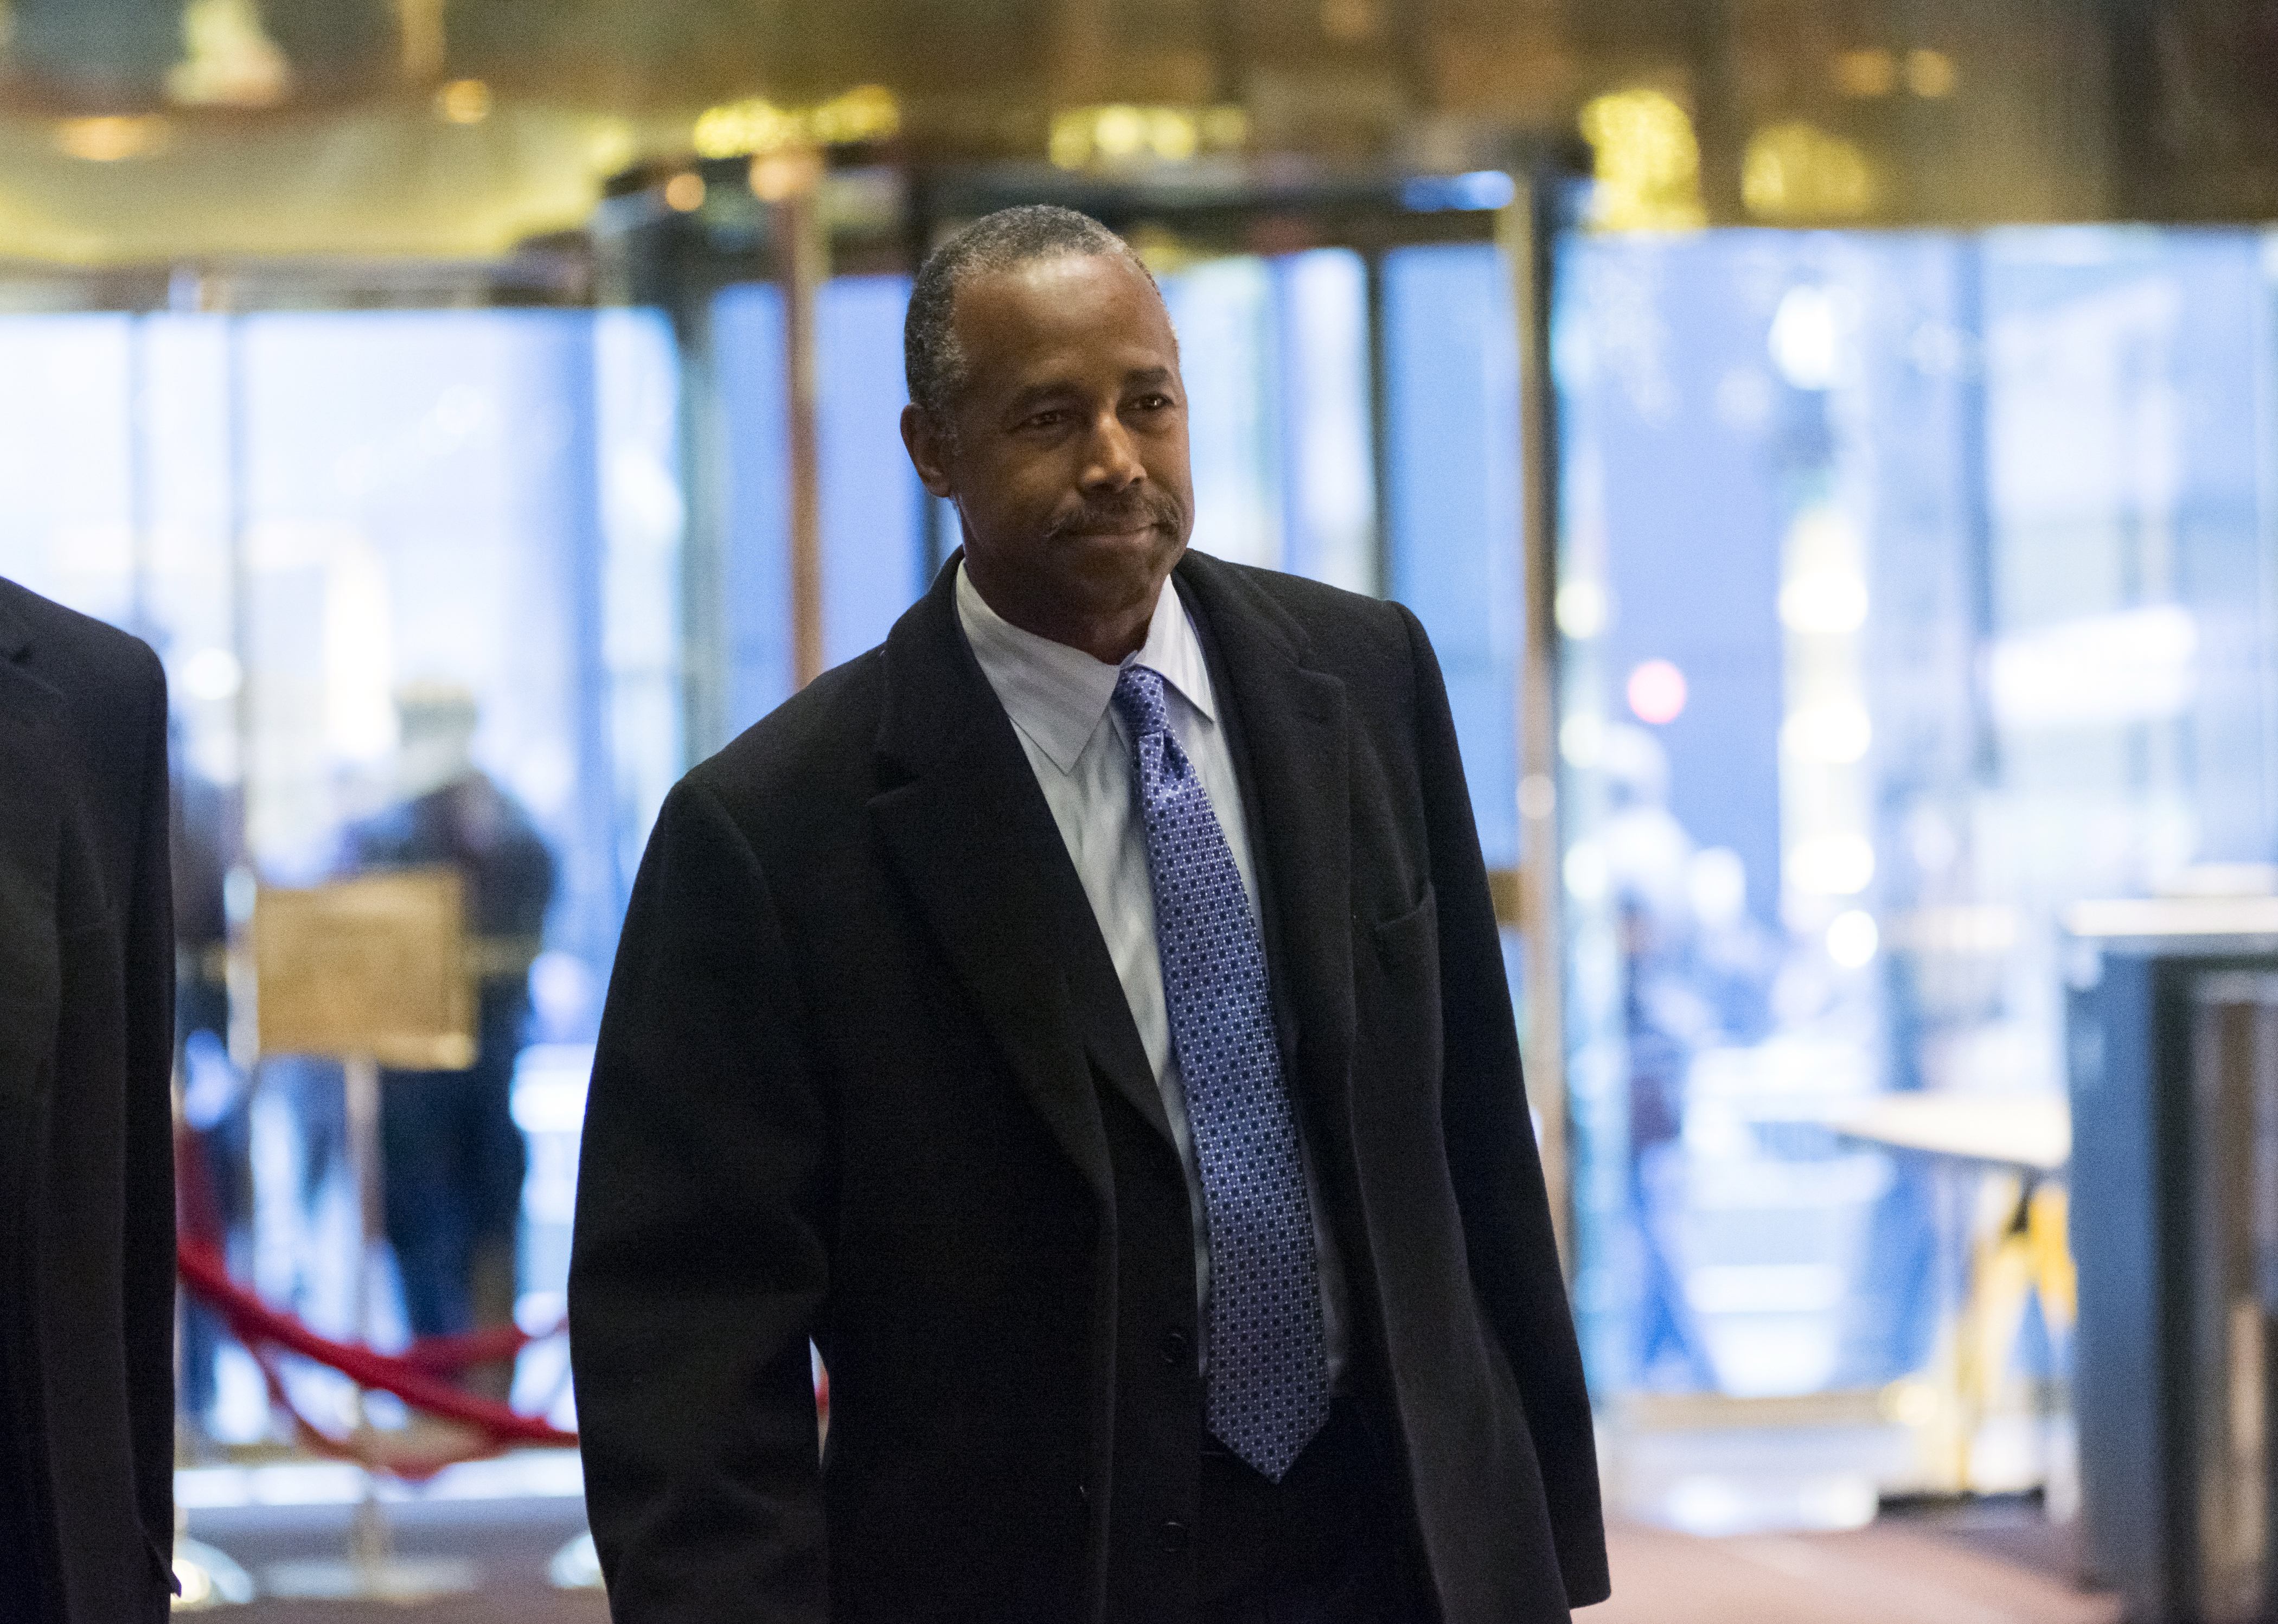 Ben Carson, secretary of U.S. Housing and Urban Development (HUD) nominee for President-elect Donald Trump, arrives in the lobby of Trump Tower in New York, U.S., on Monday, Dec. 12, 2016. (Albin Lohr-Jones/Bloomberg via Getty Images)